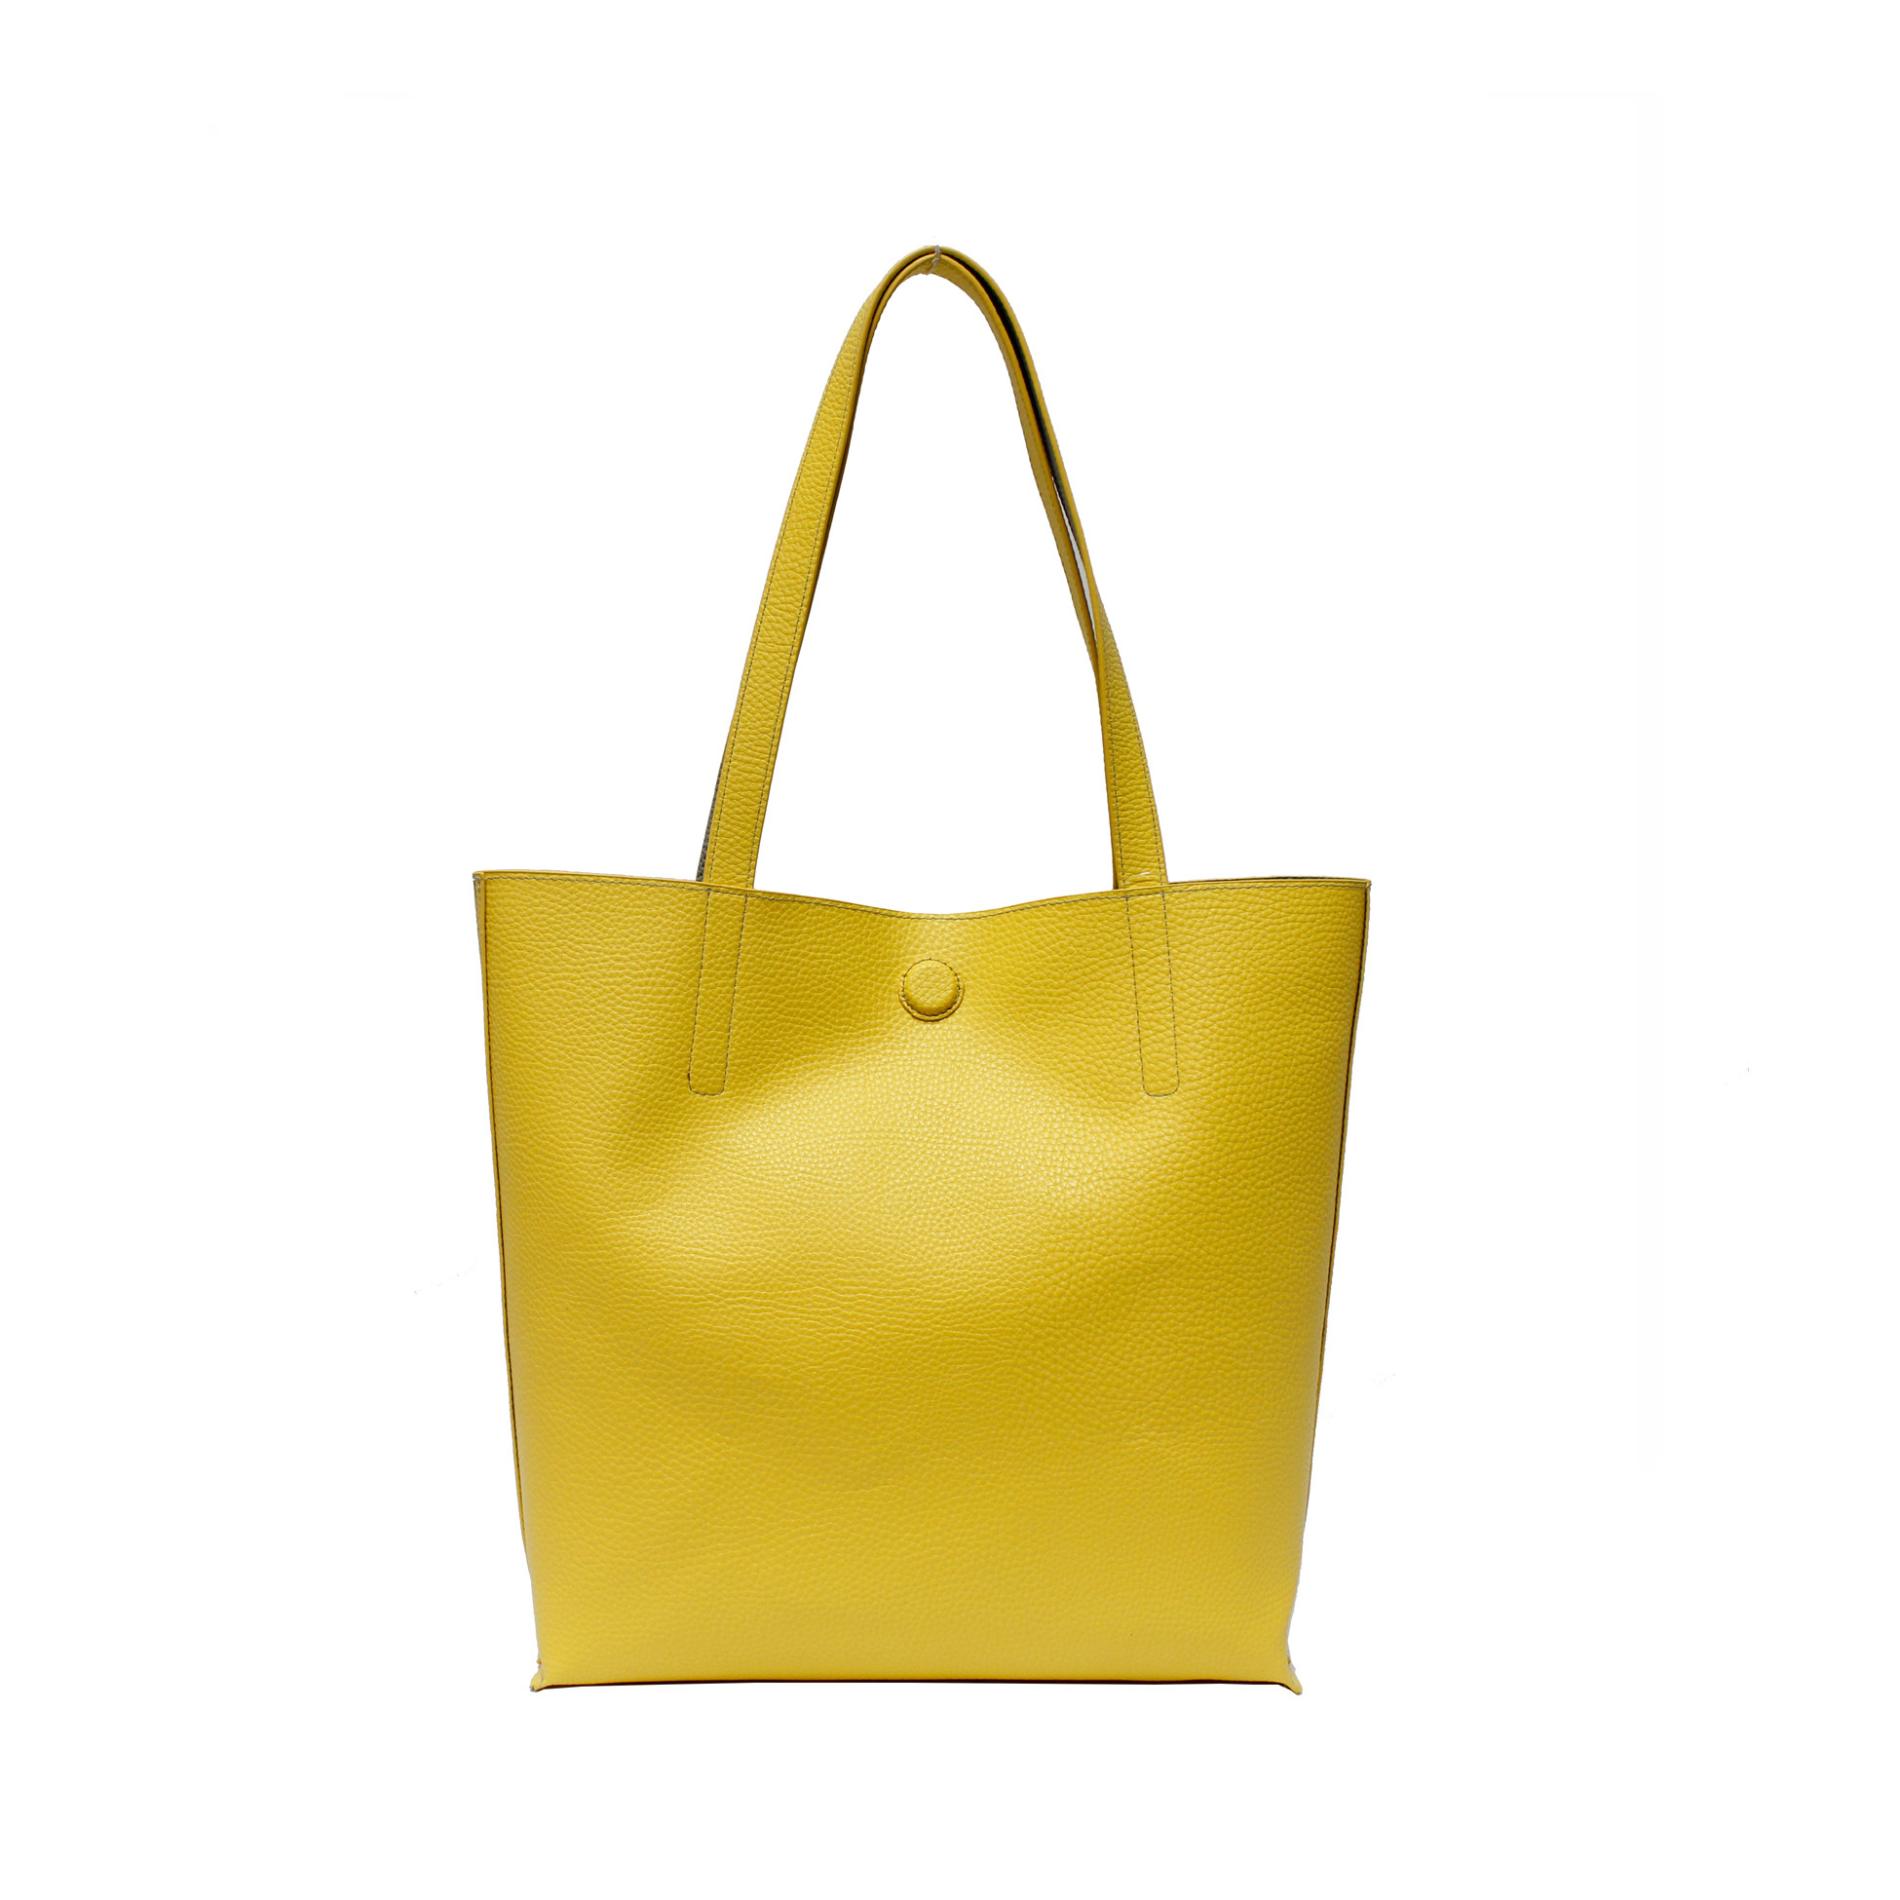 Simply Styled Women's Robyn Reversible Tote Bag